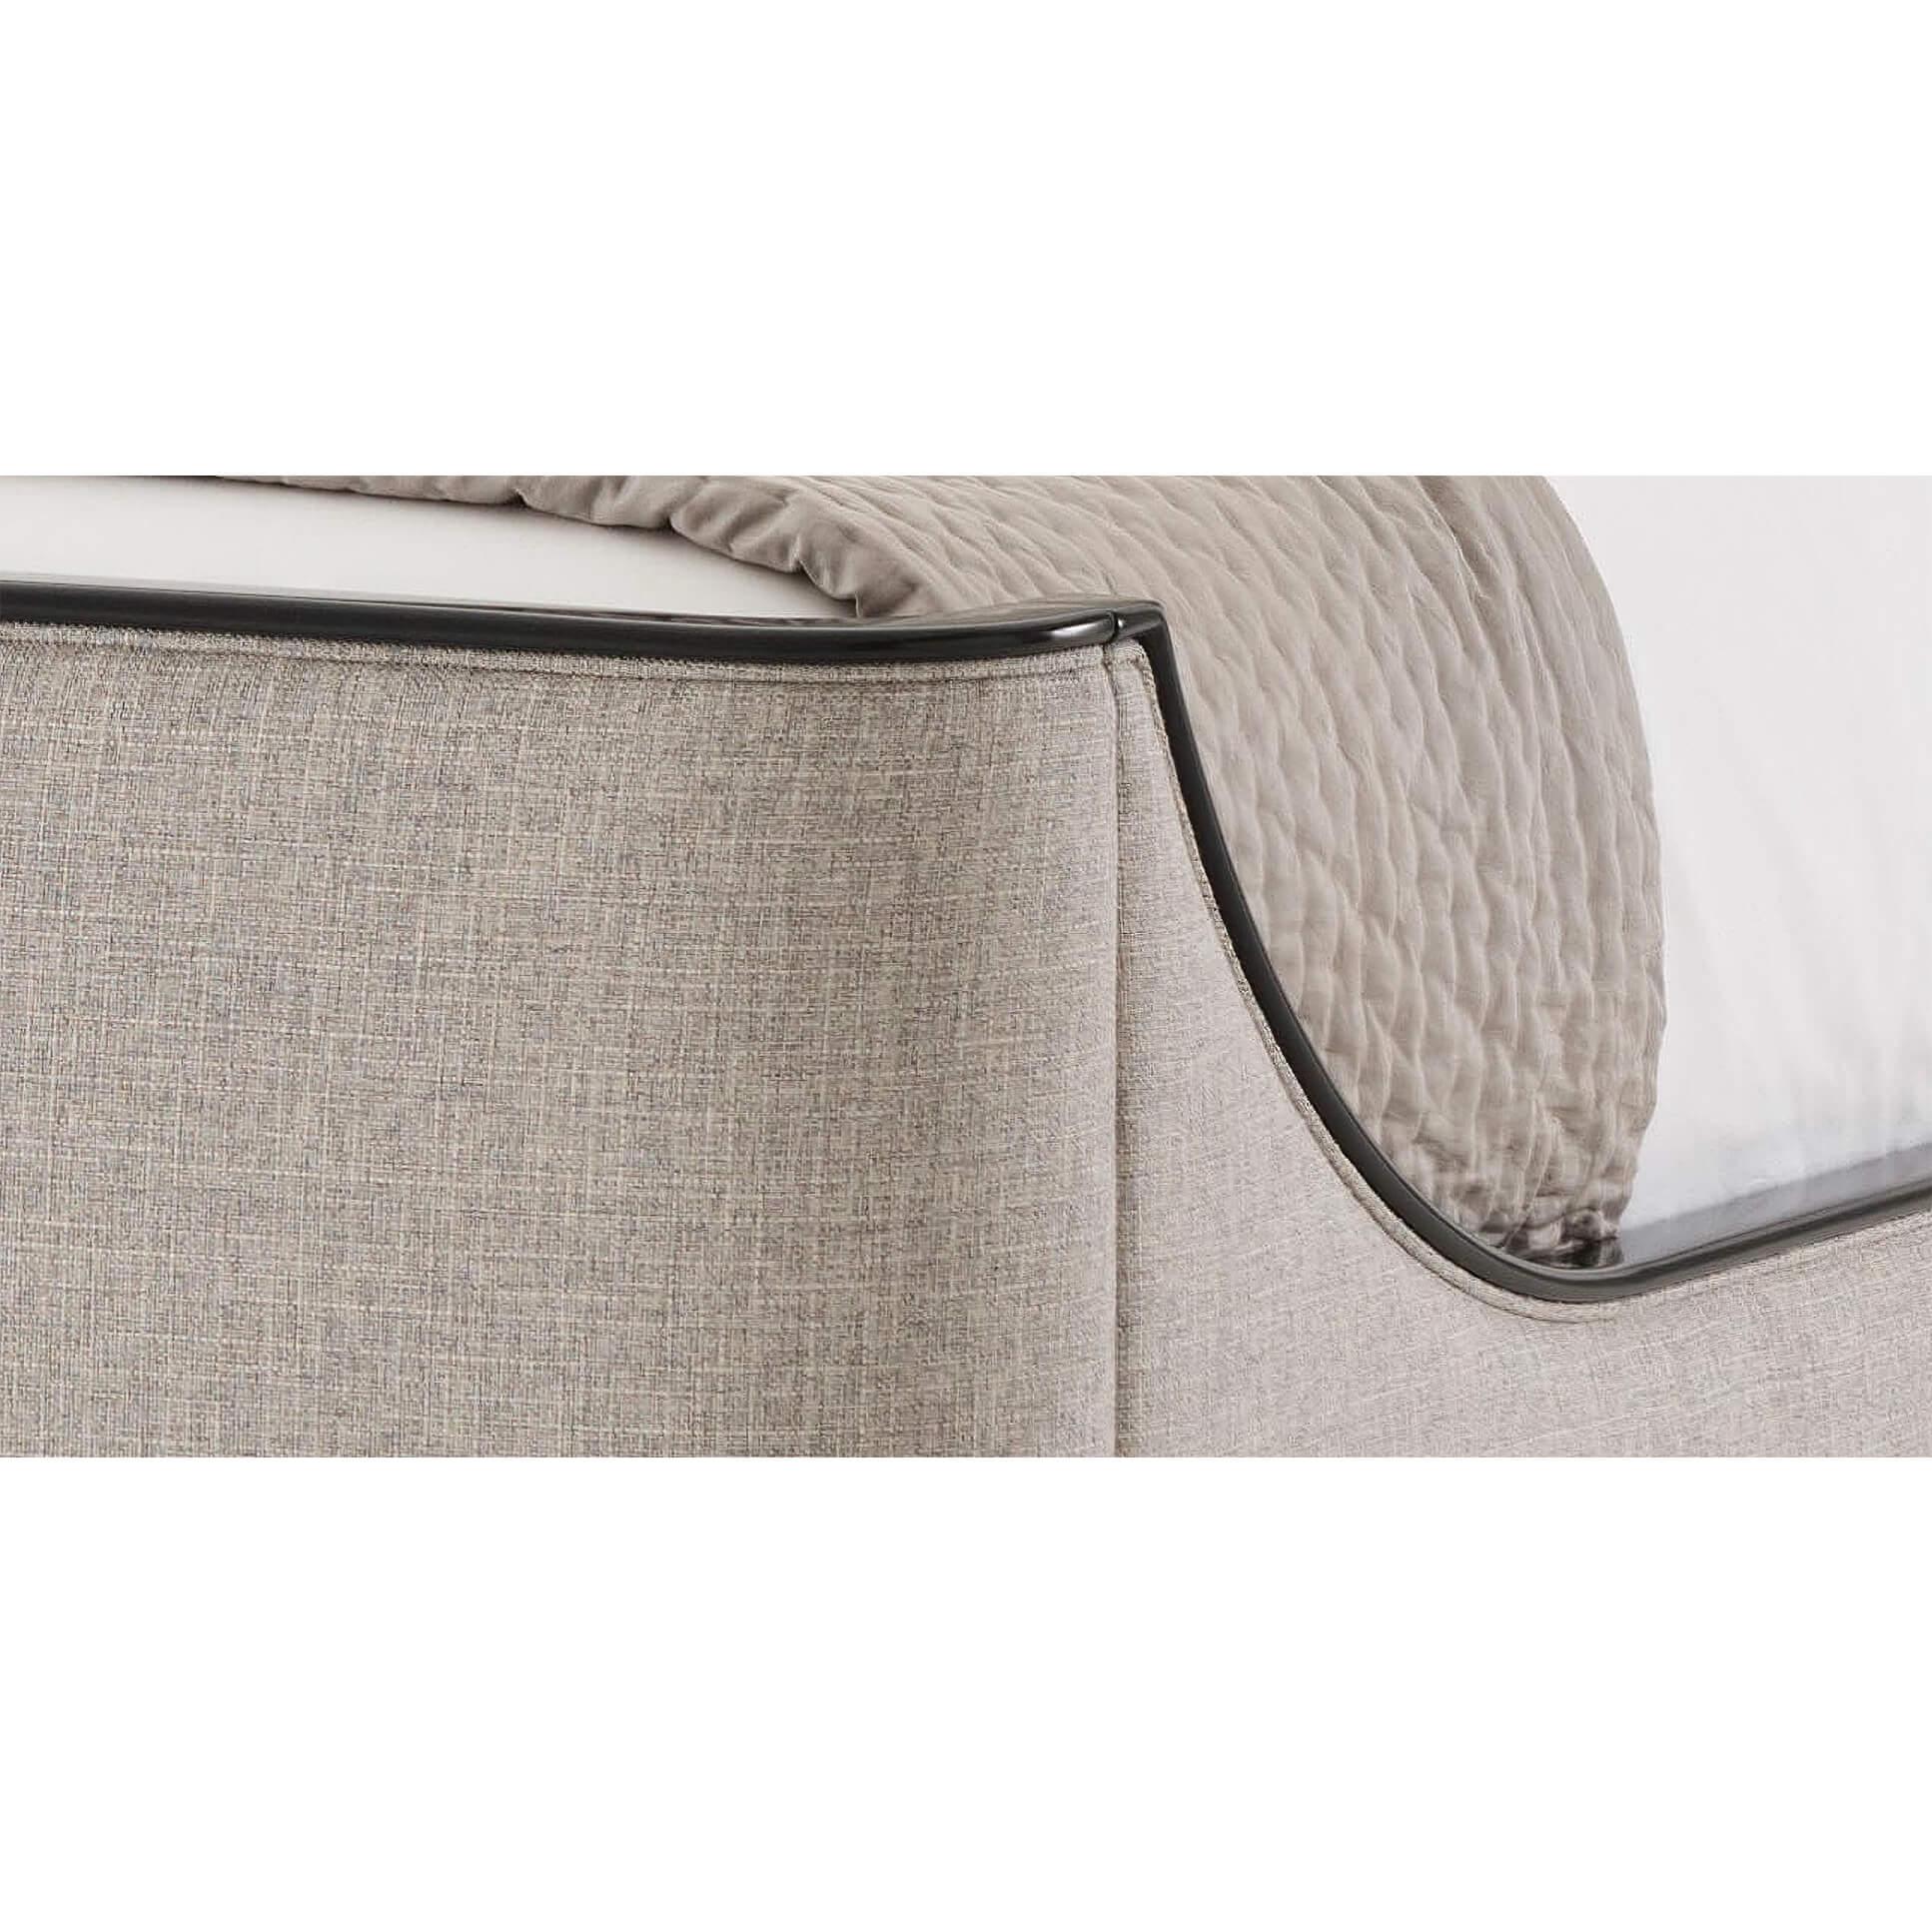 Contemporary Midcentury Upholstered King Size Bed